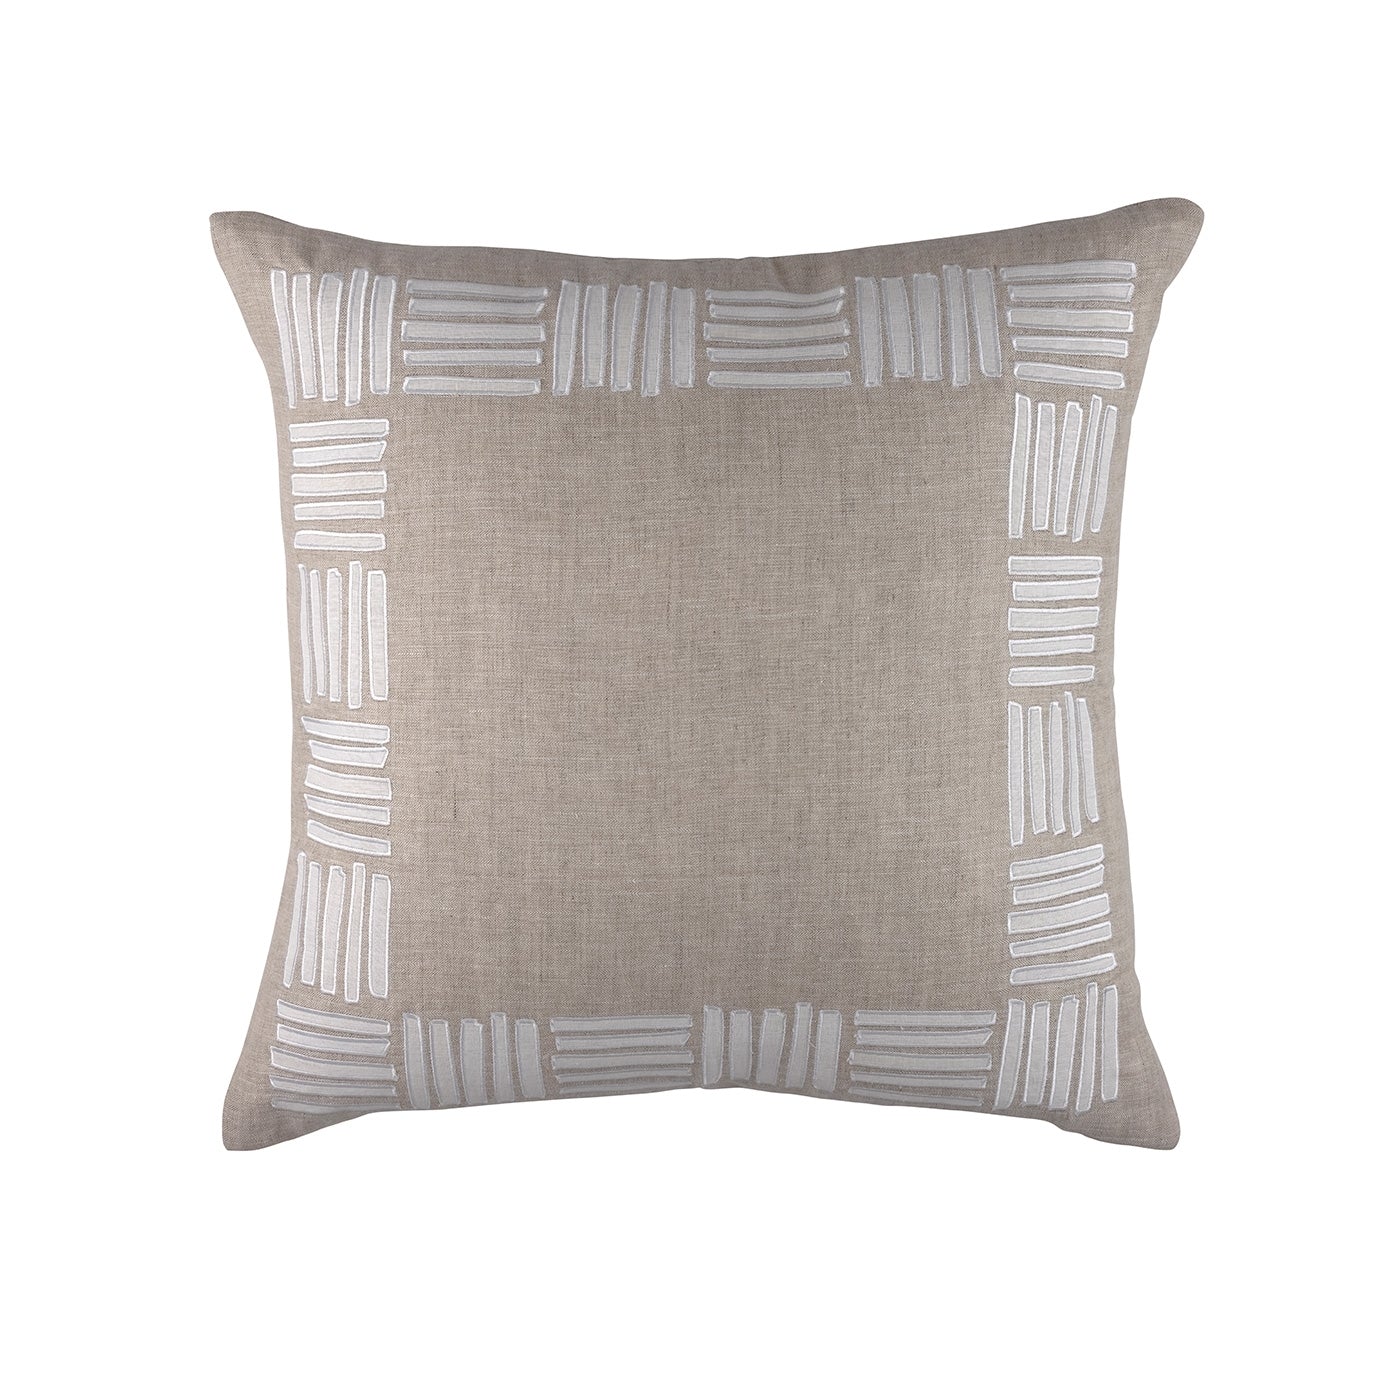 Aspen Natural & White Euro Pillow by Lili Alessandra | Fig Linens